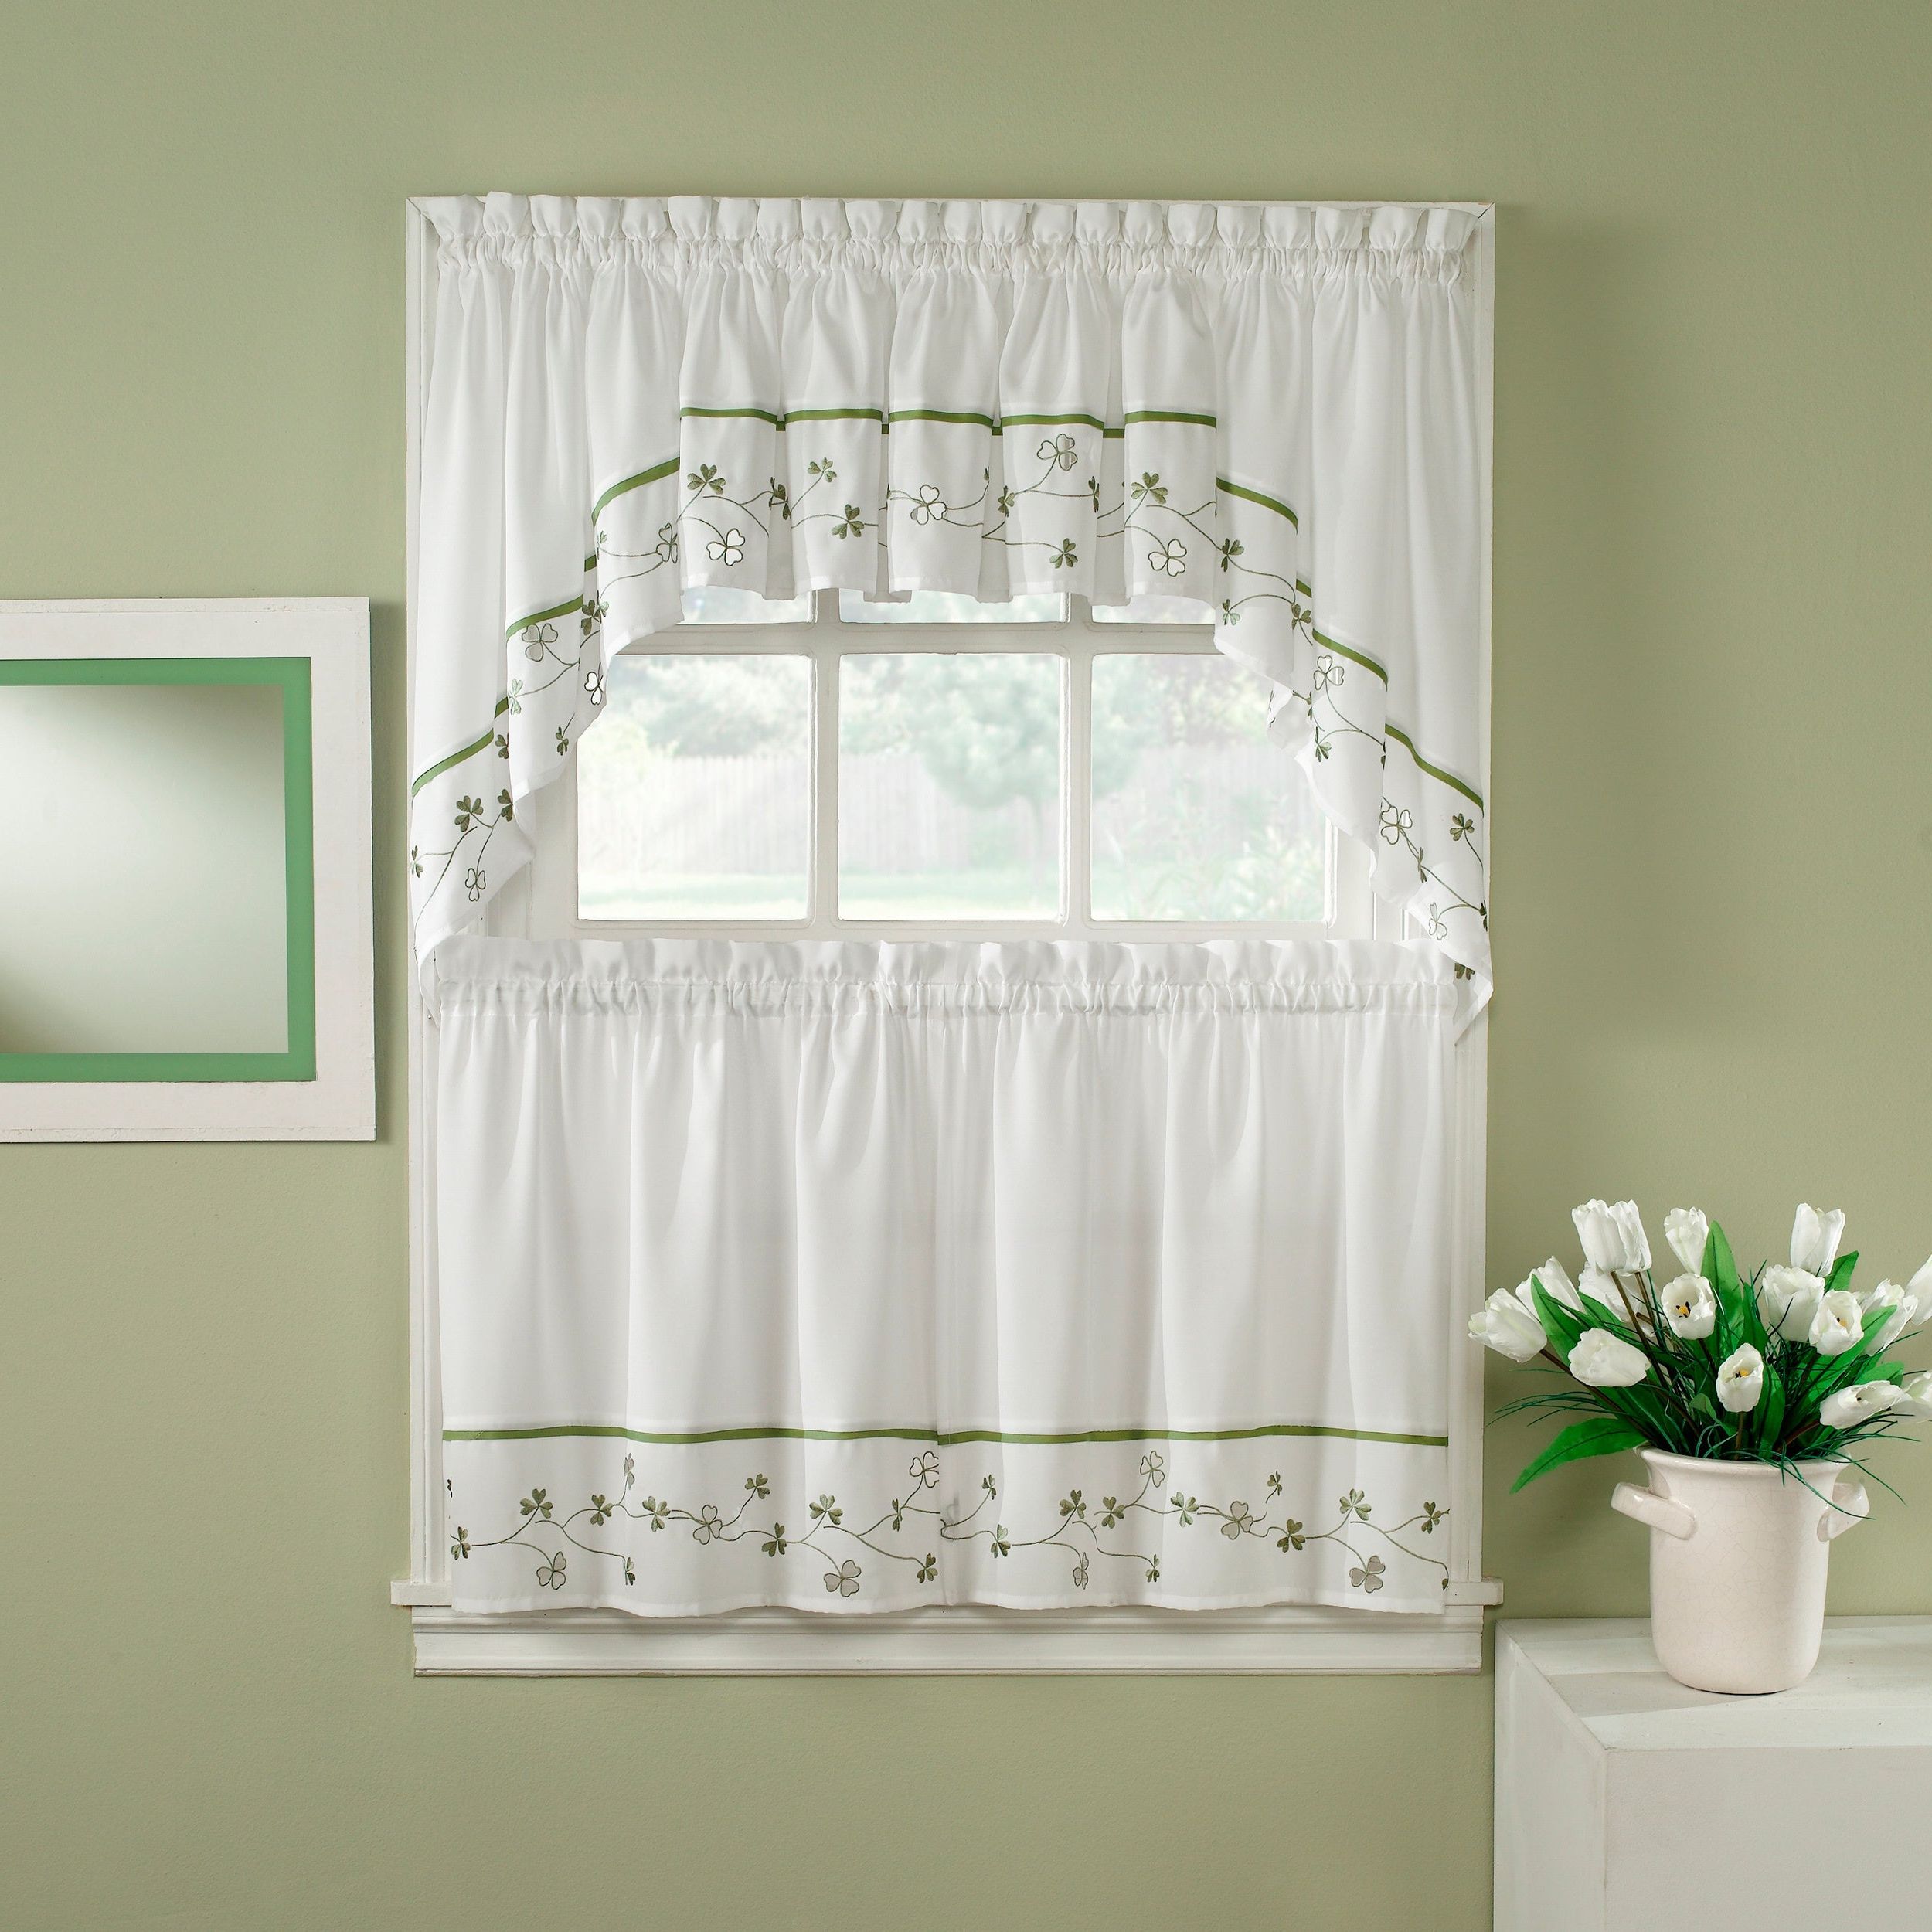 Clover Green/ White 5 Piece Curtain Tier And Swag Set Intended For Well Known Cotton Lace 5 Piece Window Tier And Swag Sets (View 14 of 20)